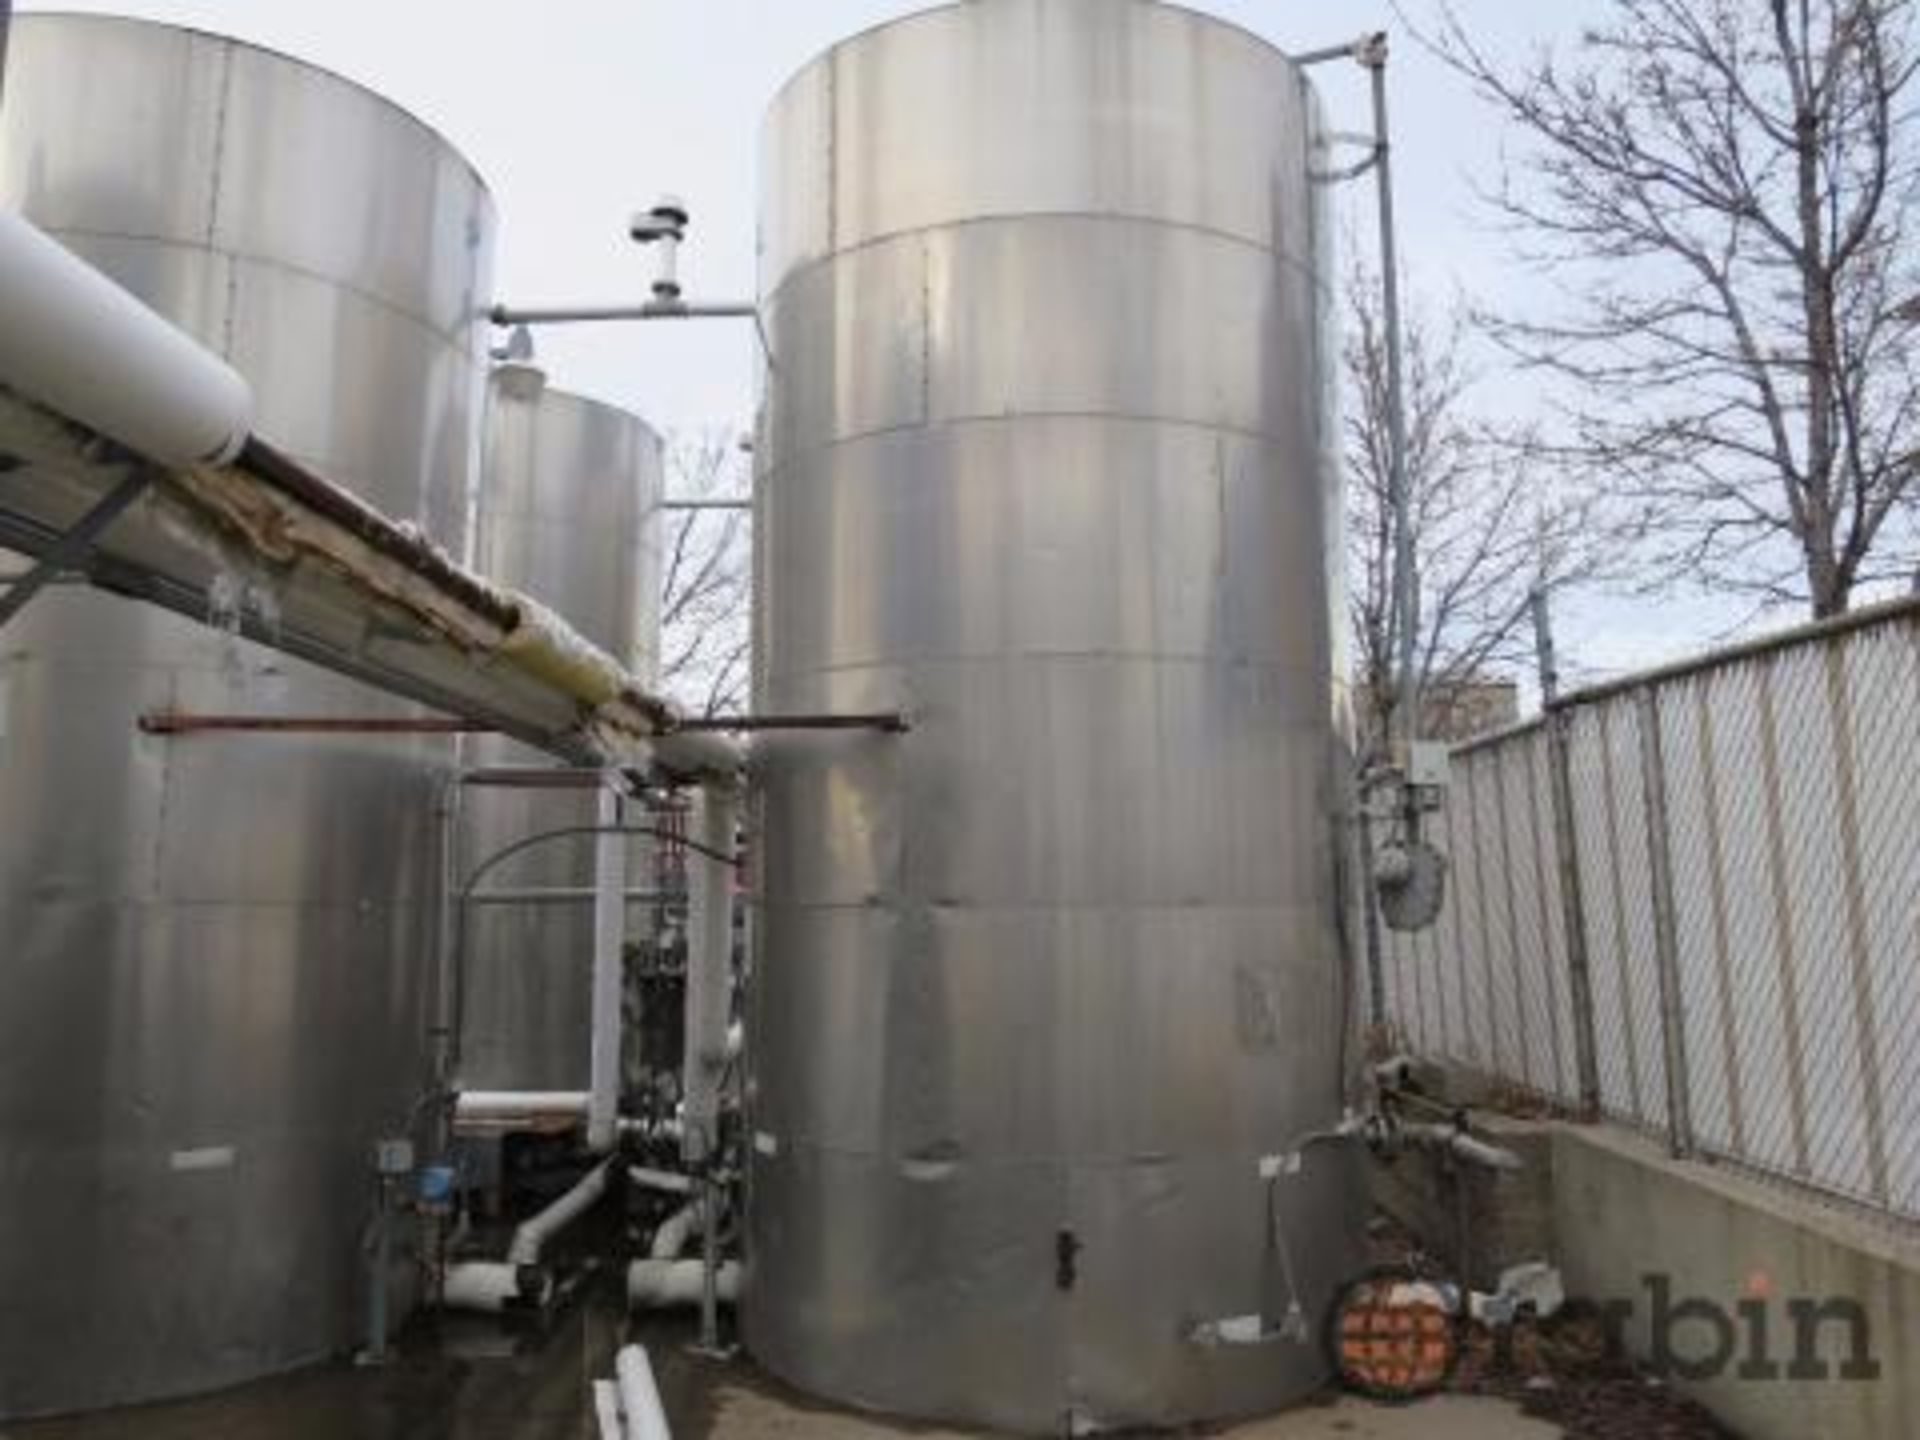 Stainless Tanks - Image 5 of 7